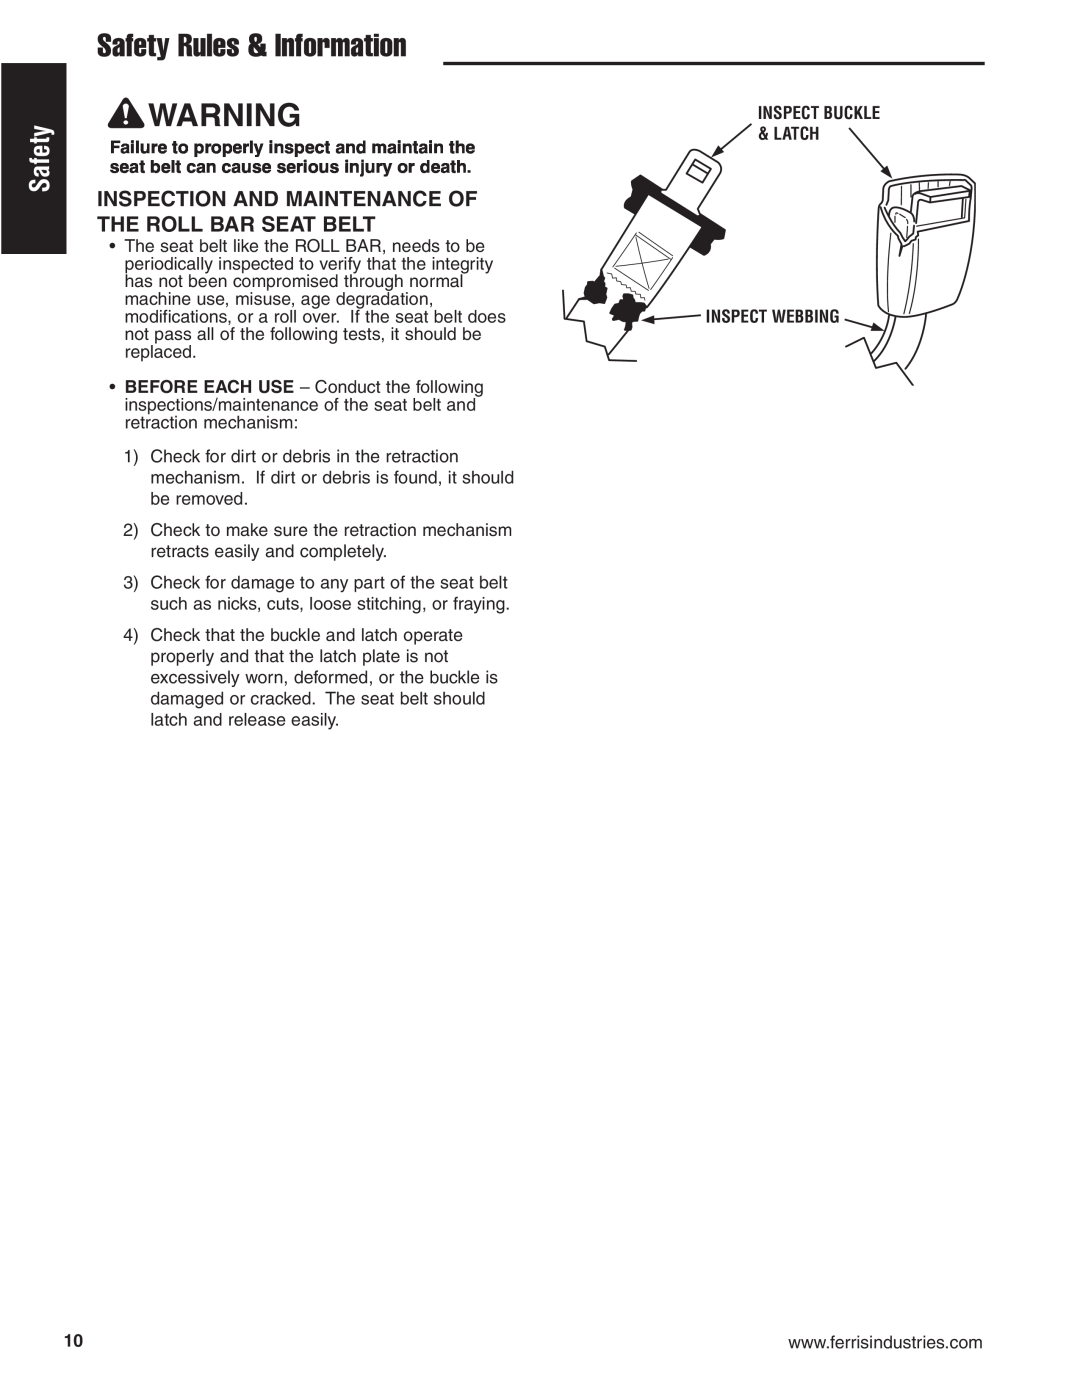 Ferris Industries 5900625, 5901170 manual Safety Rules & Information, Inspection And Maintenance Of The Roll Bar Seat Belt 